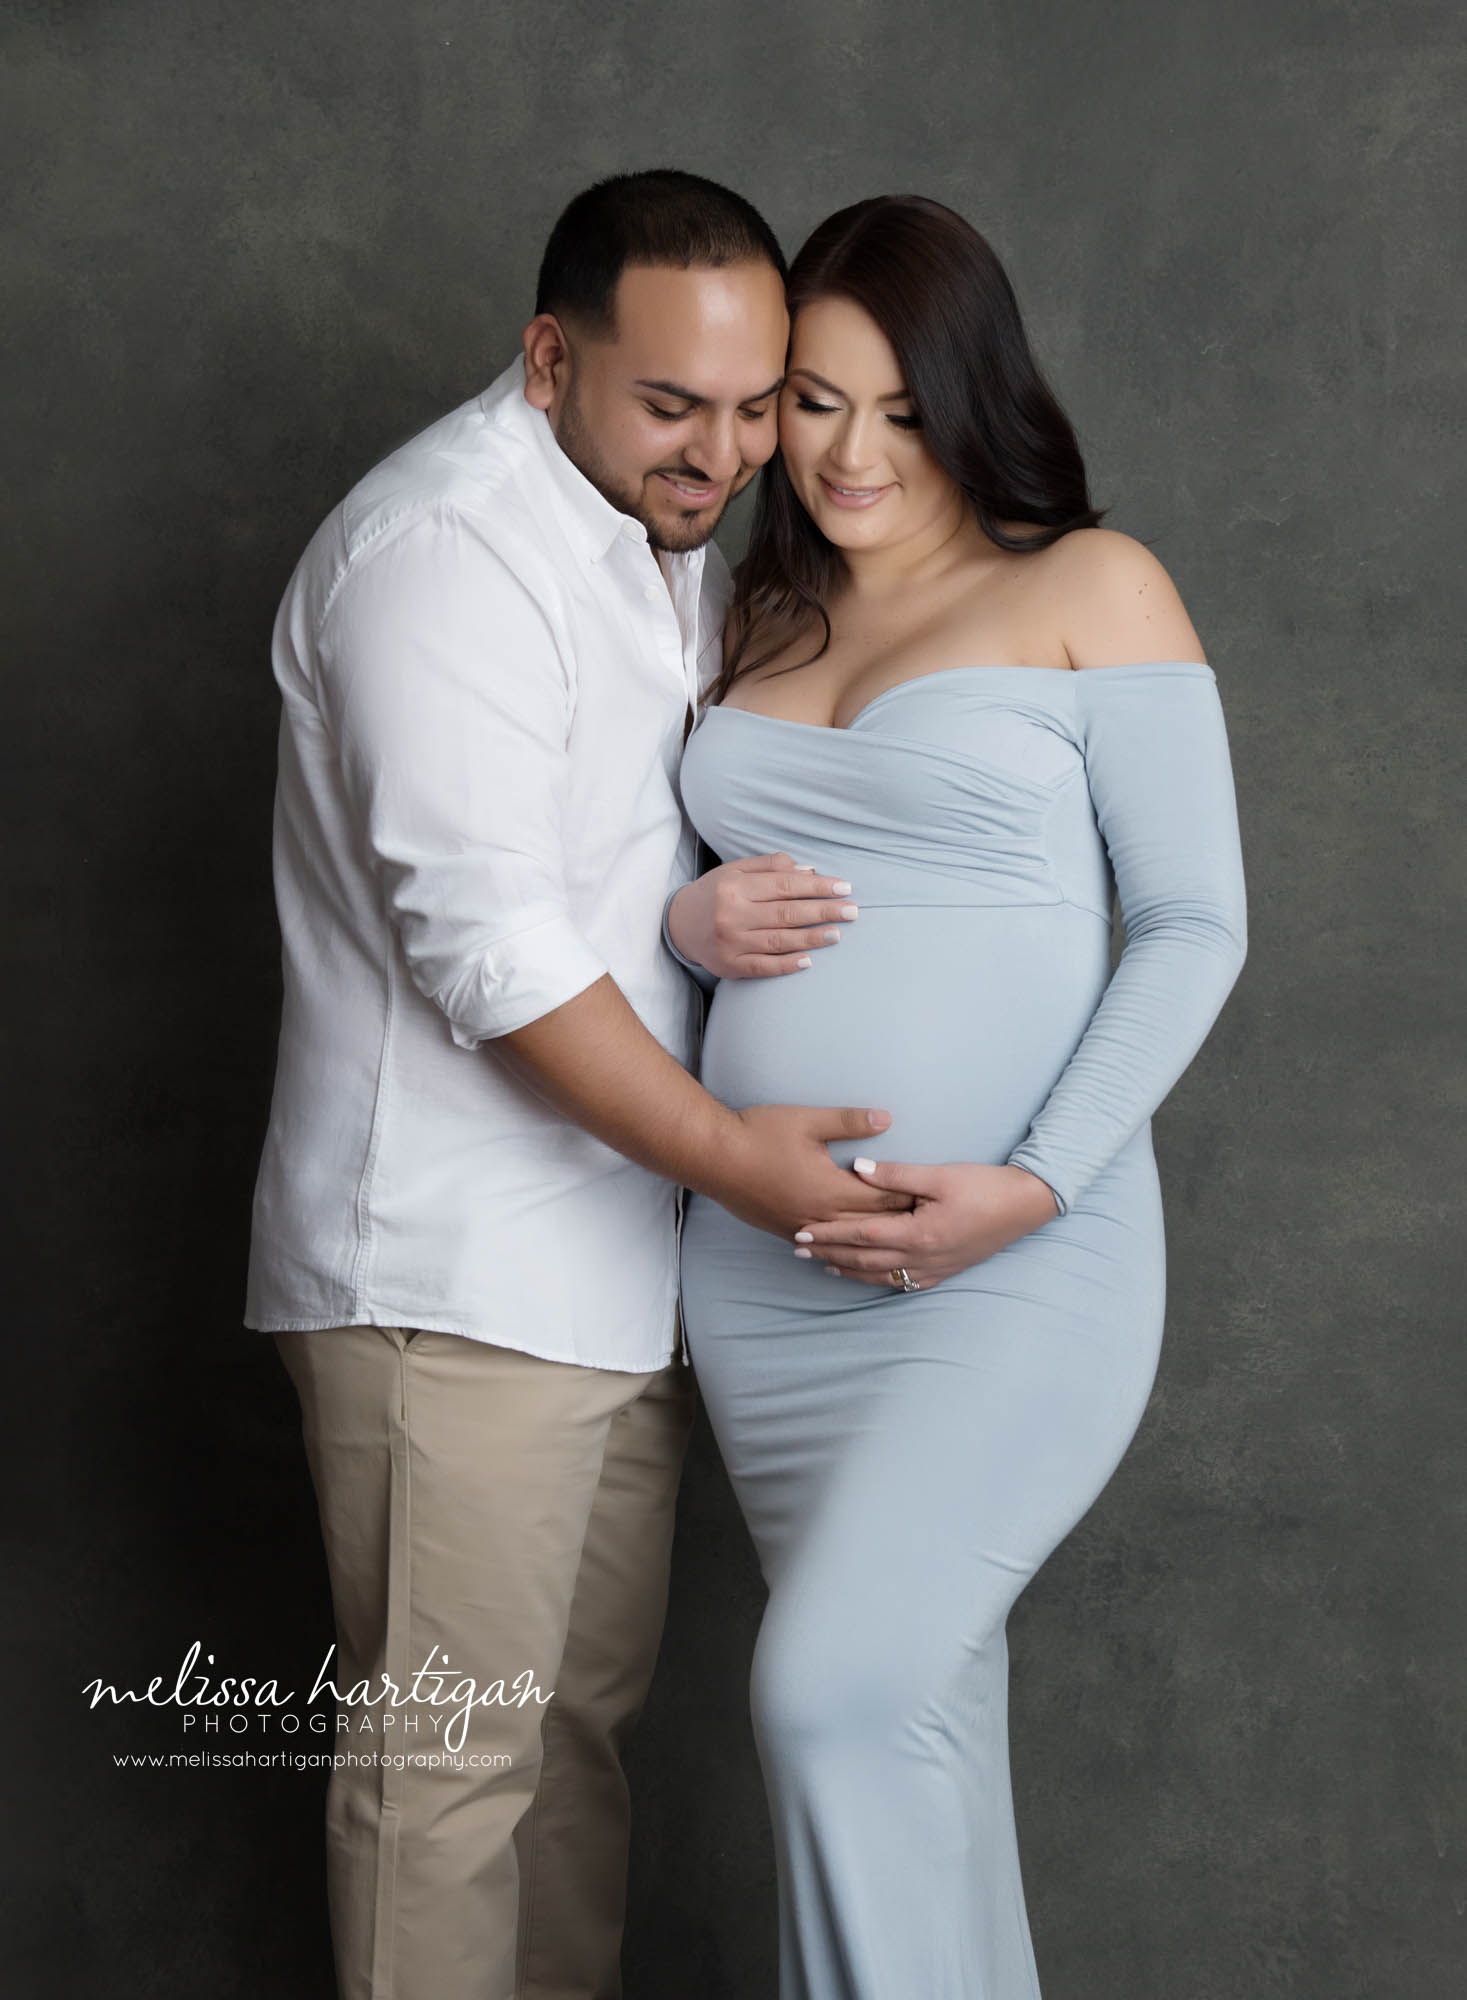 expectant couple holding baby bump in studio maternity couples pose photography session